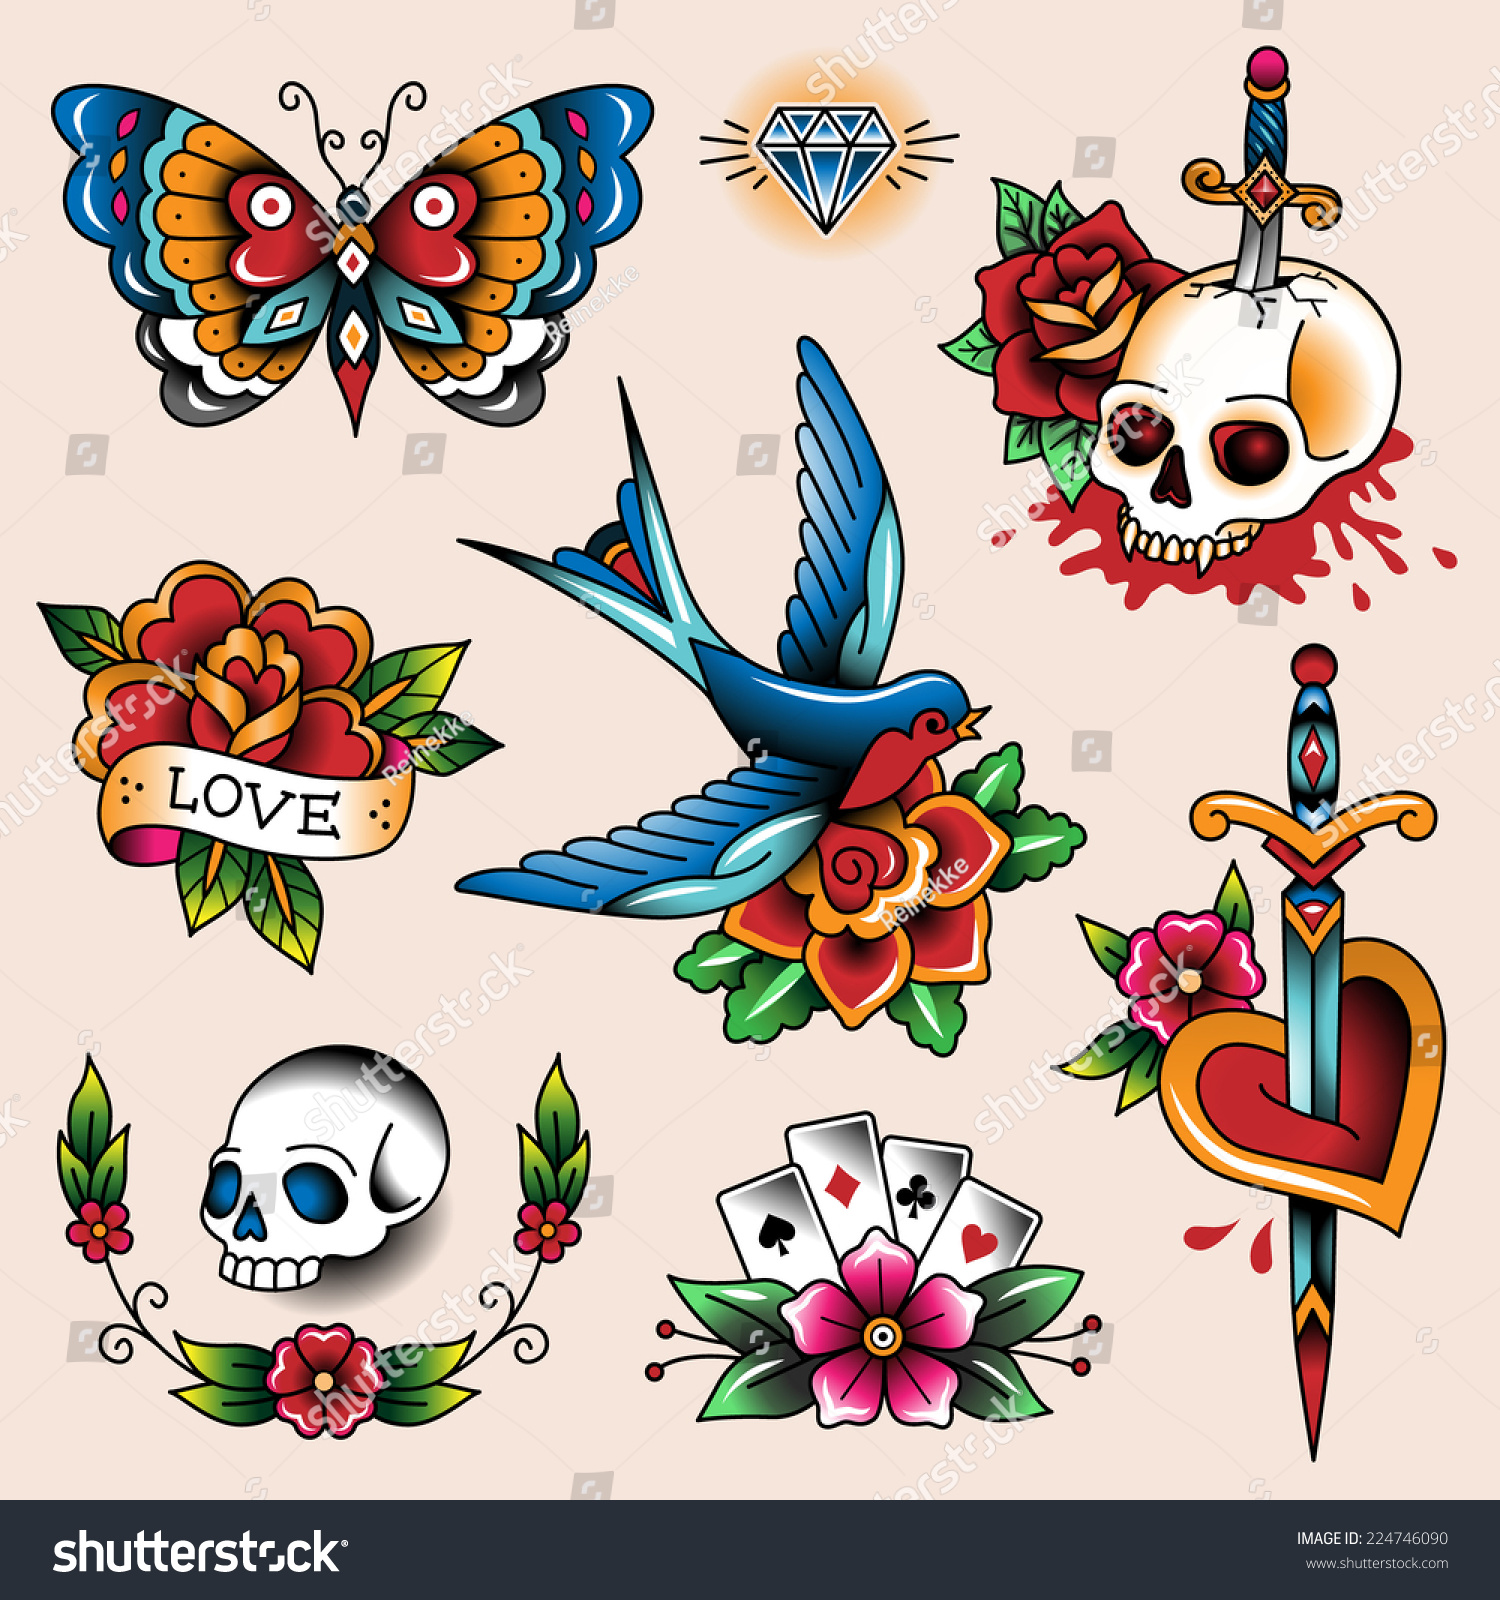 Set of color vintage tattoos for your design and decoration  #224746090